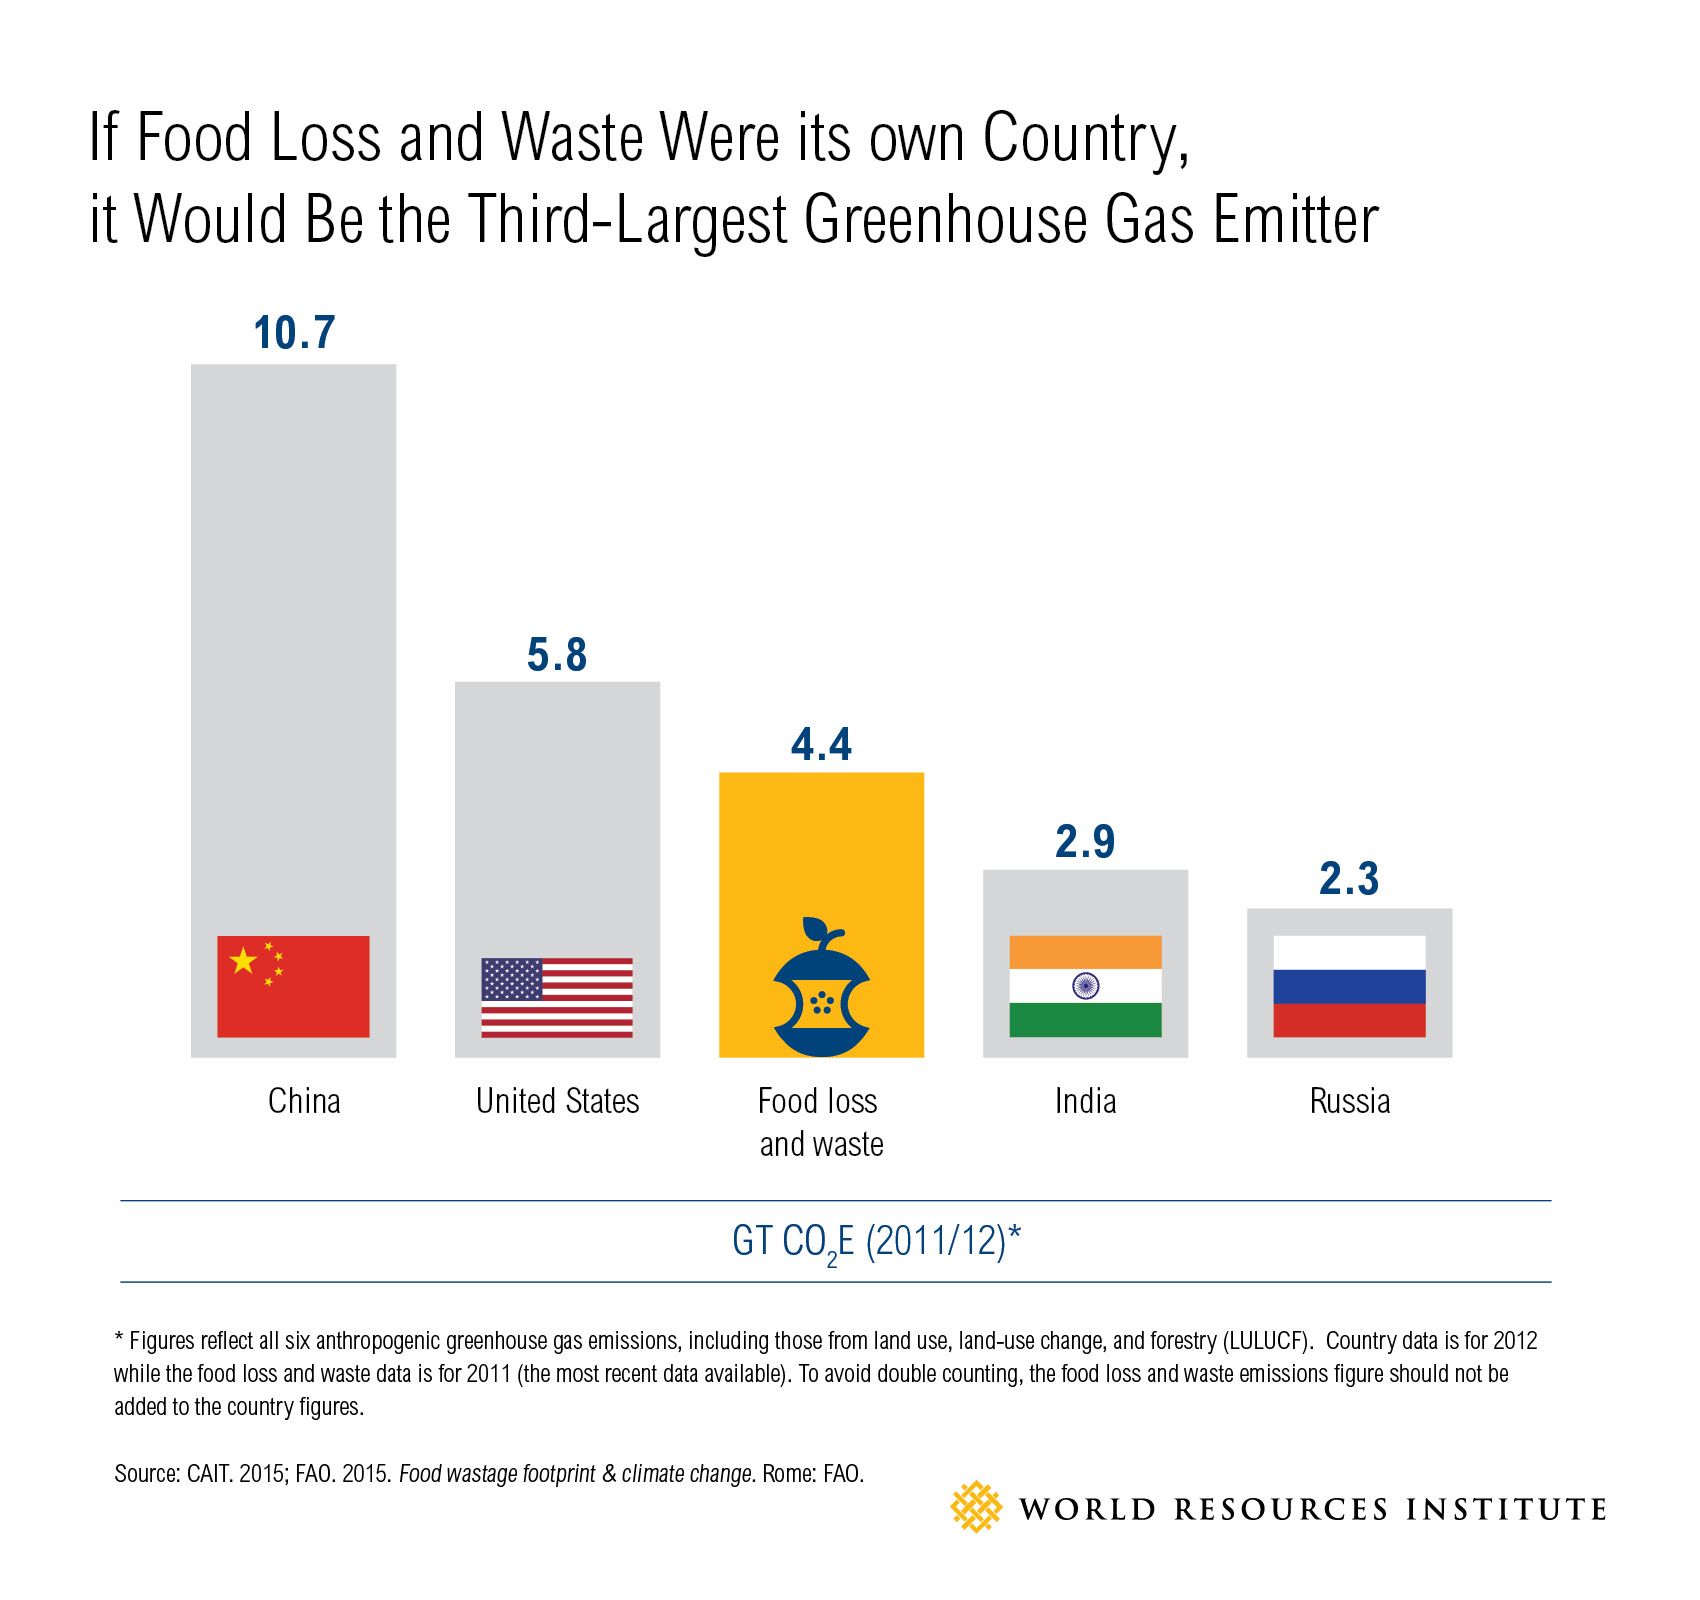 a bar graph illustrating that if emissions from food loss were its own country, it would fall behind only the US and China in terms of global emissions